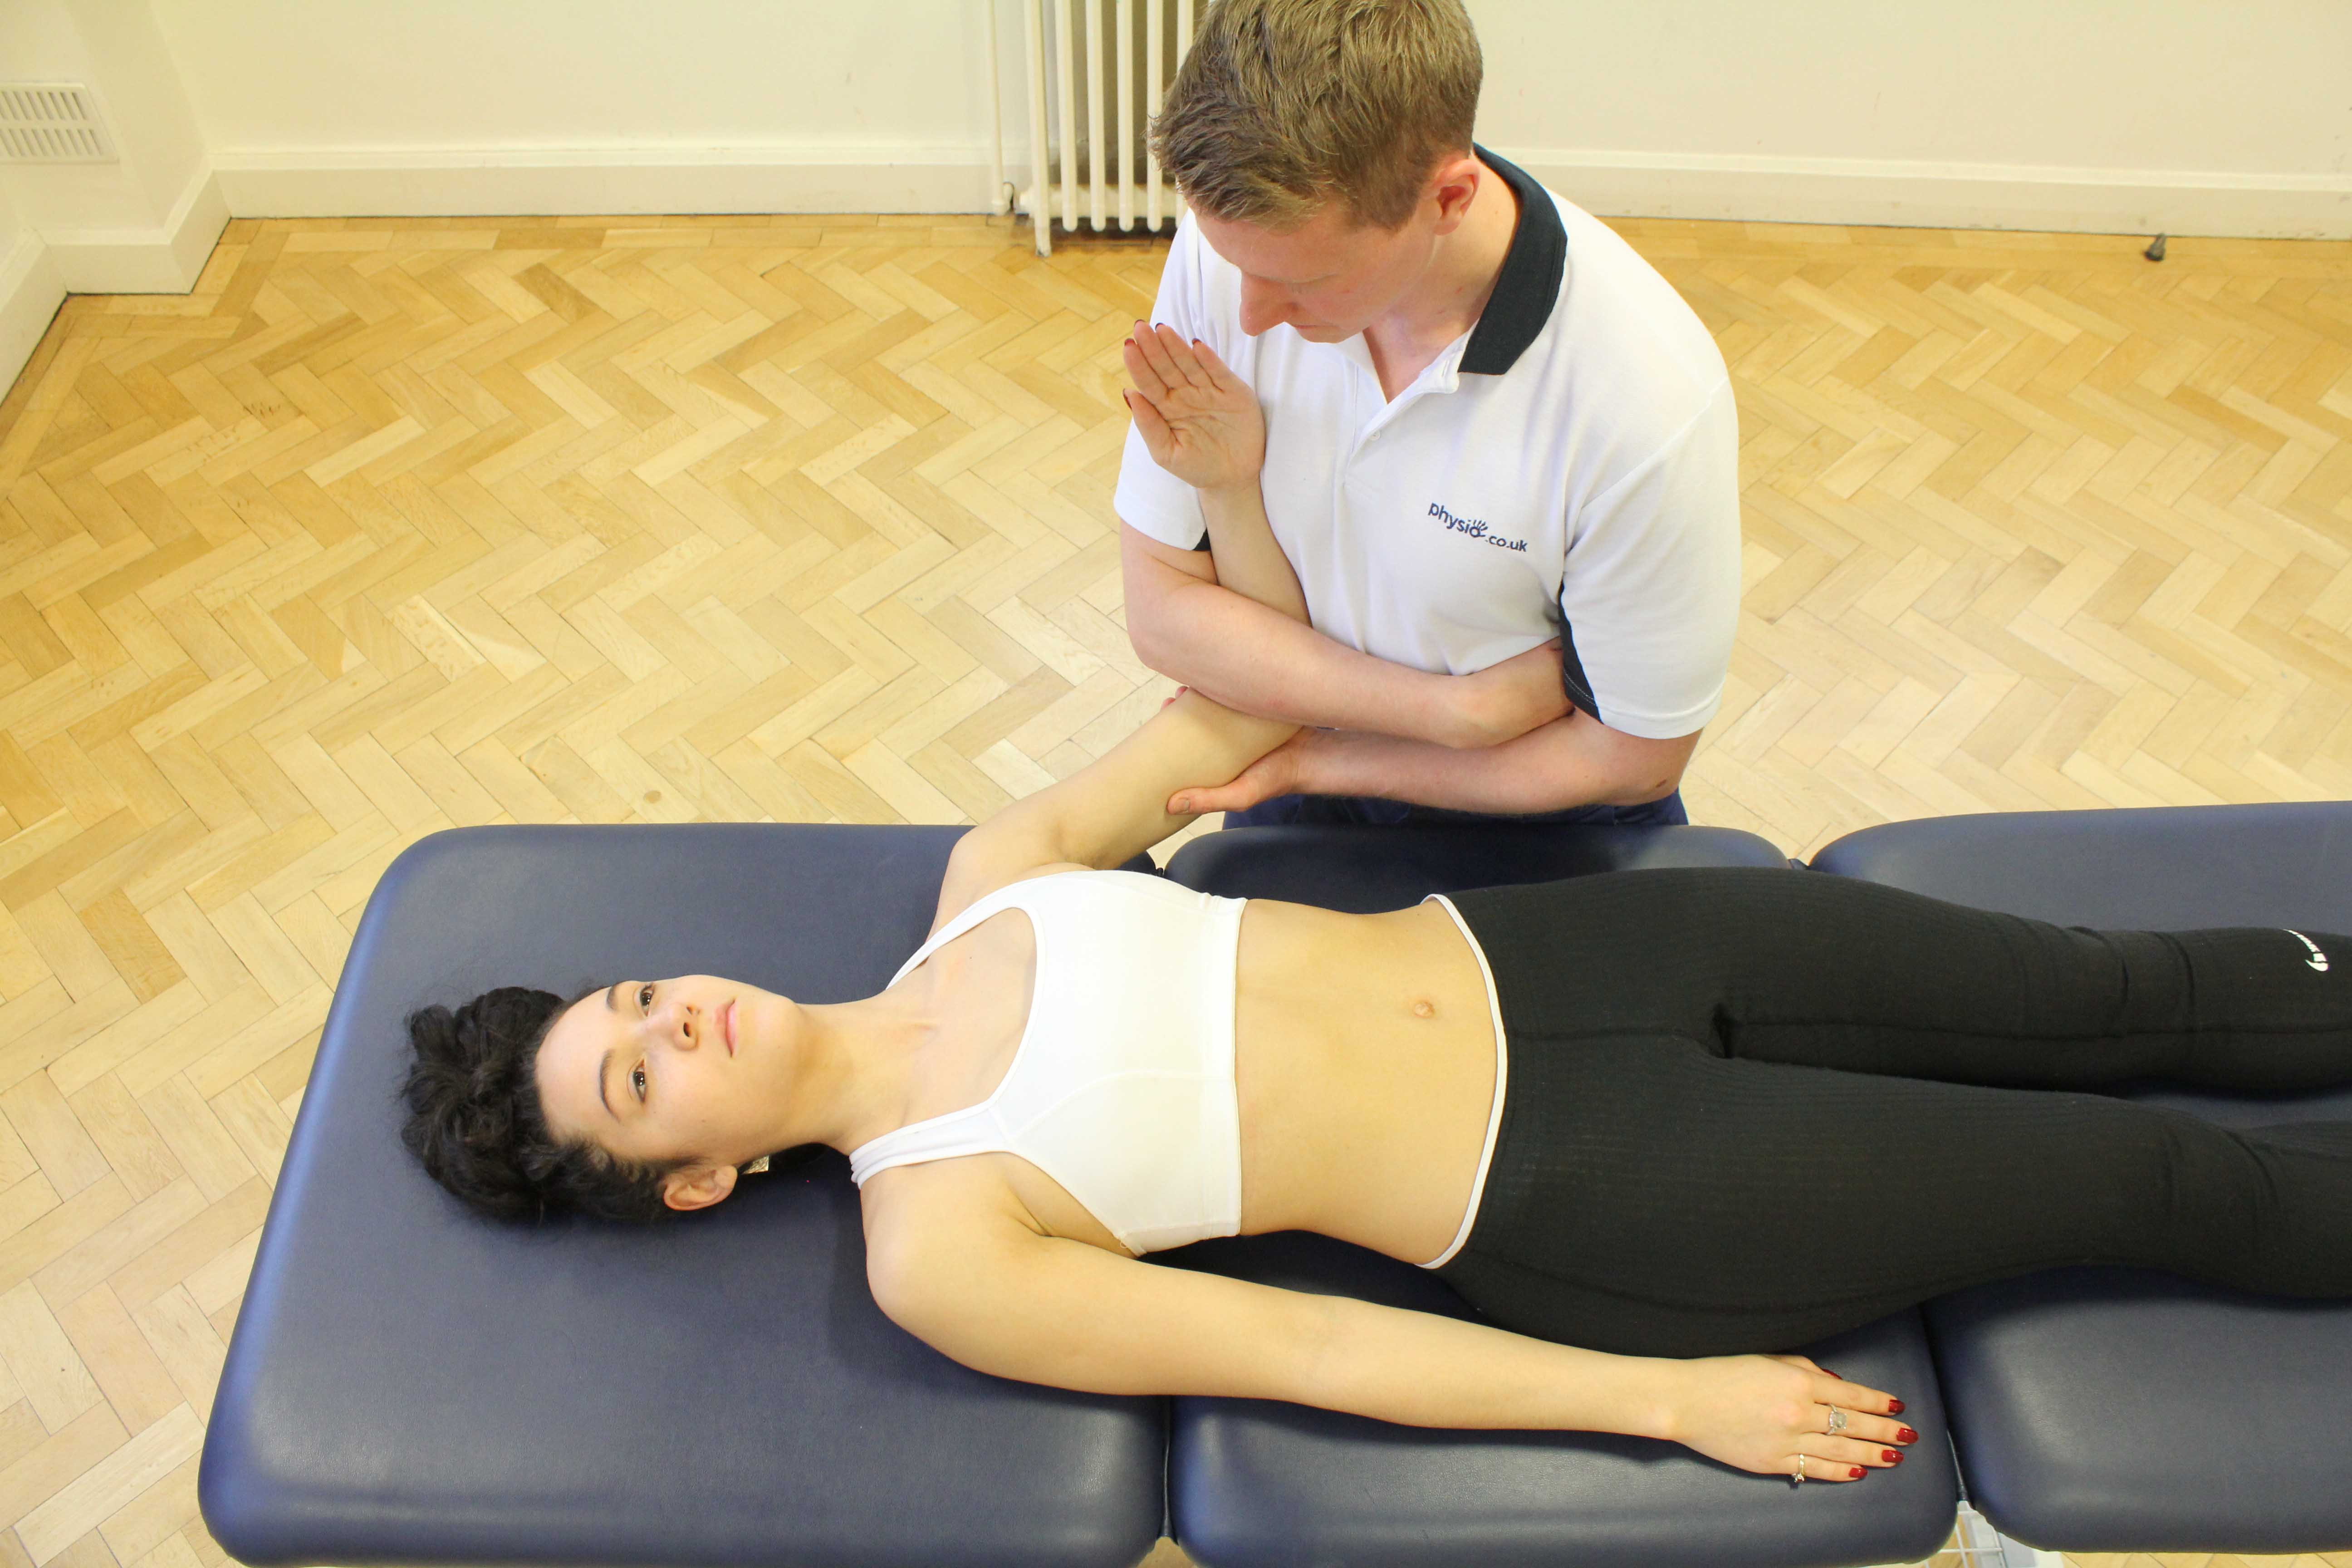 Joint distraction to relieve pain applied by an experienced physiotherapist